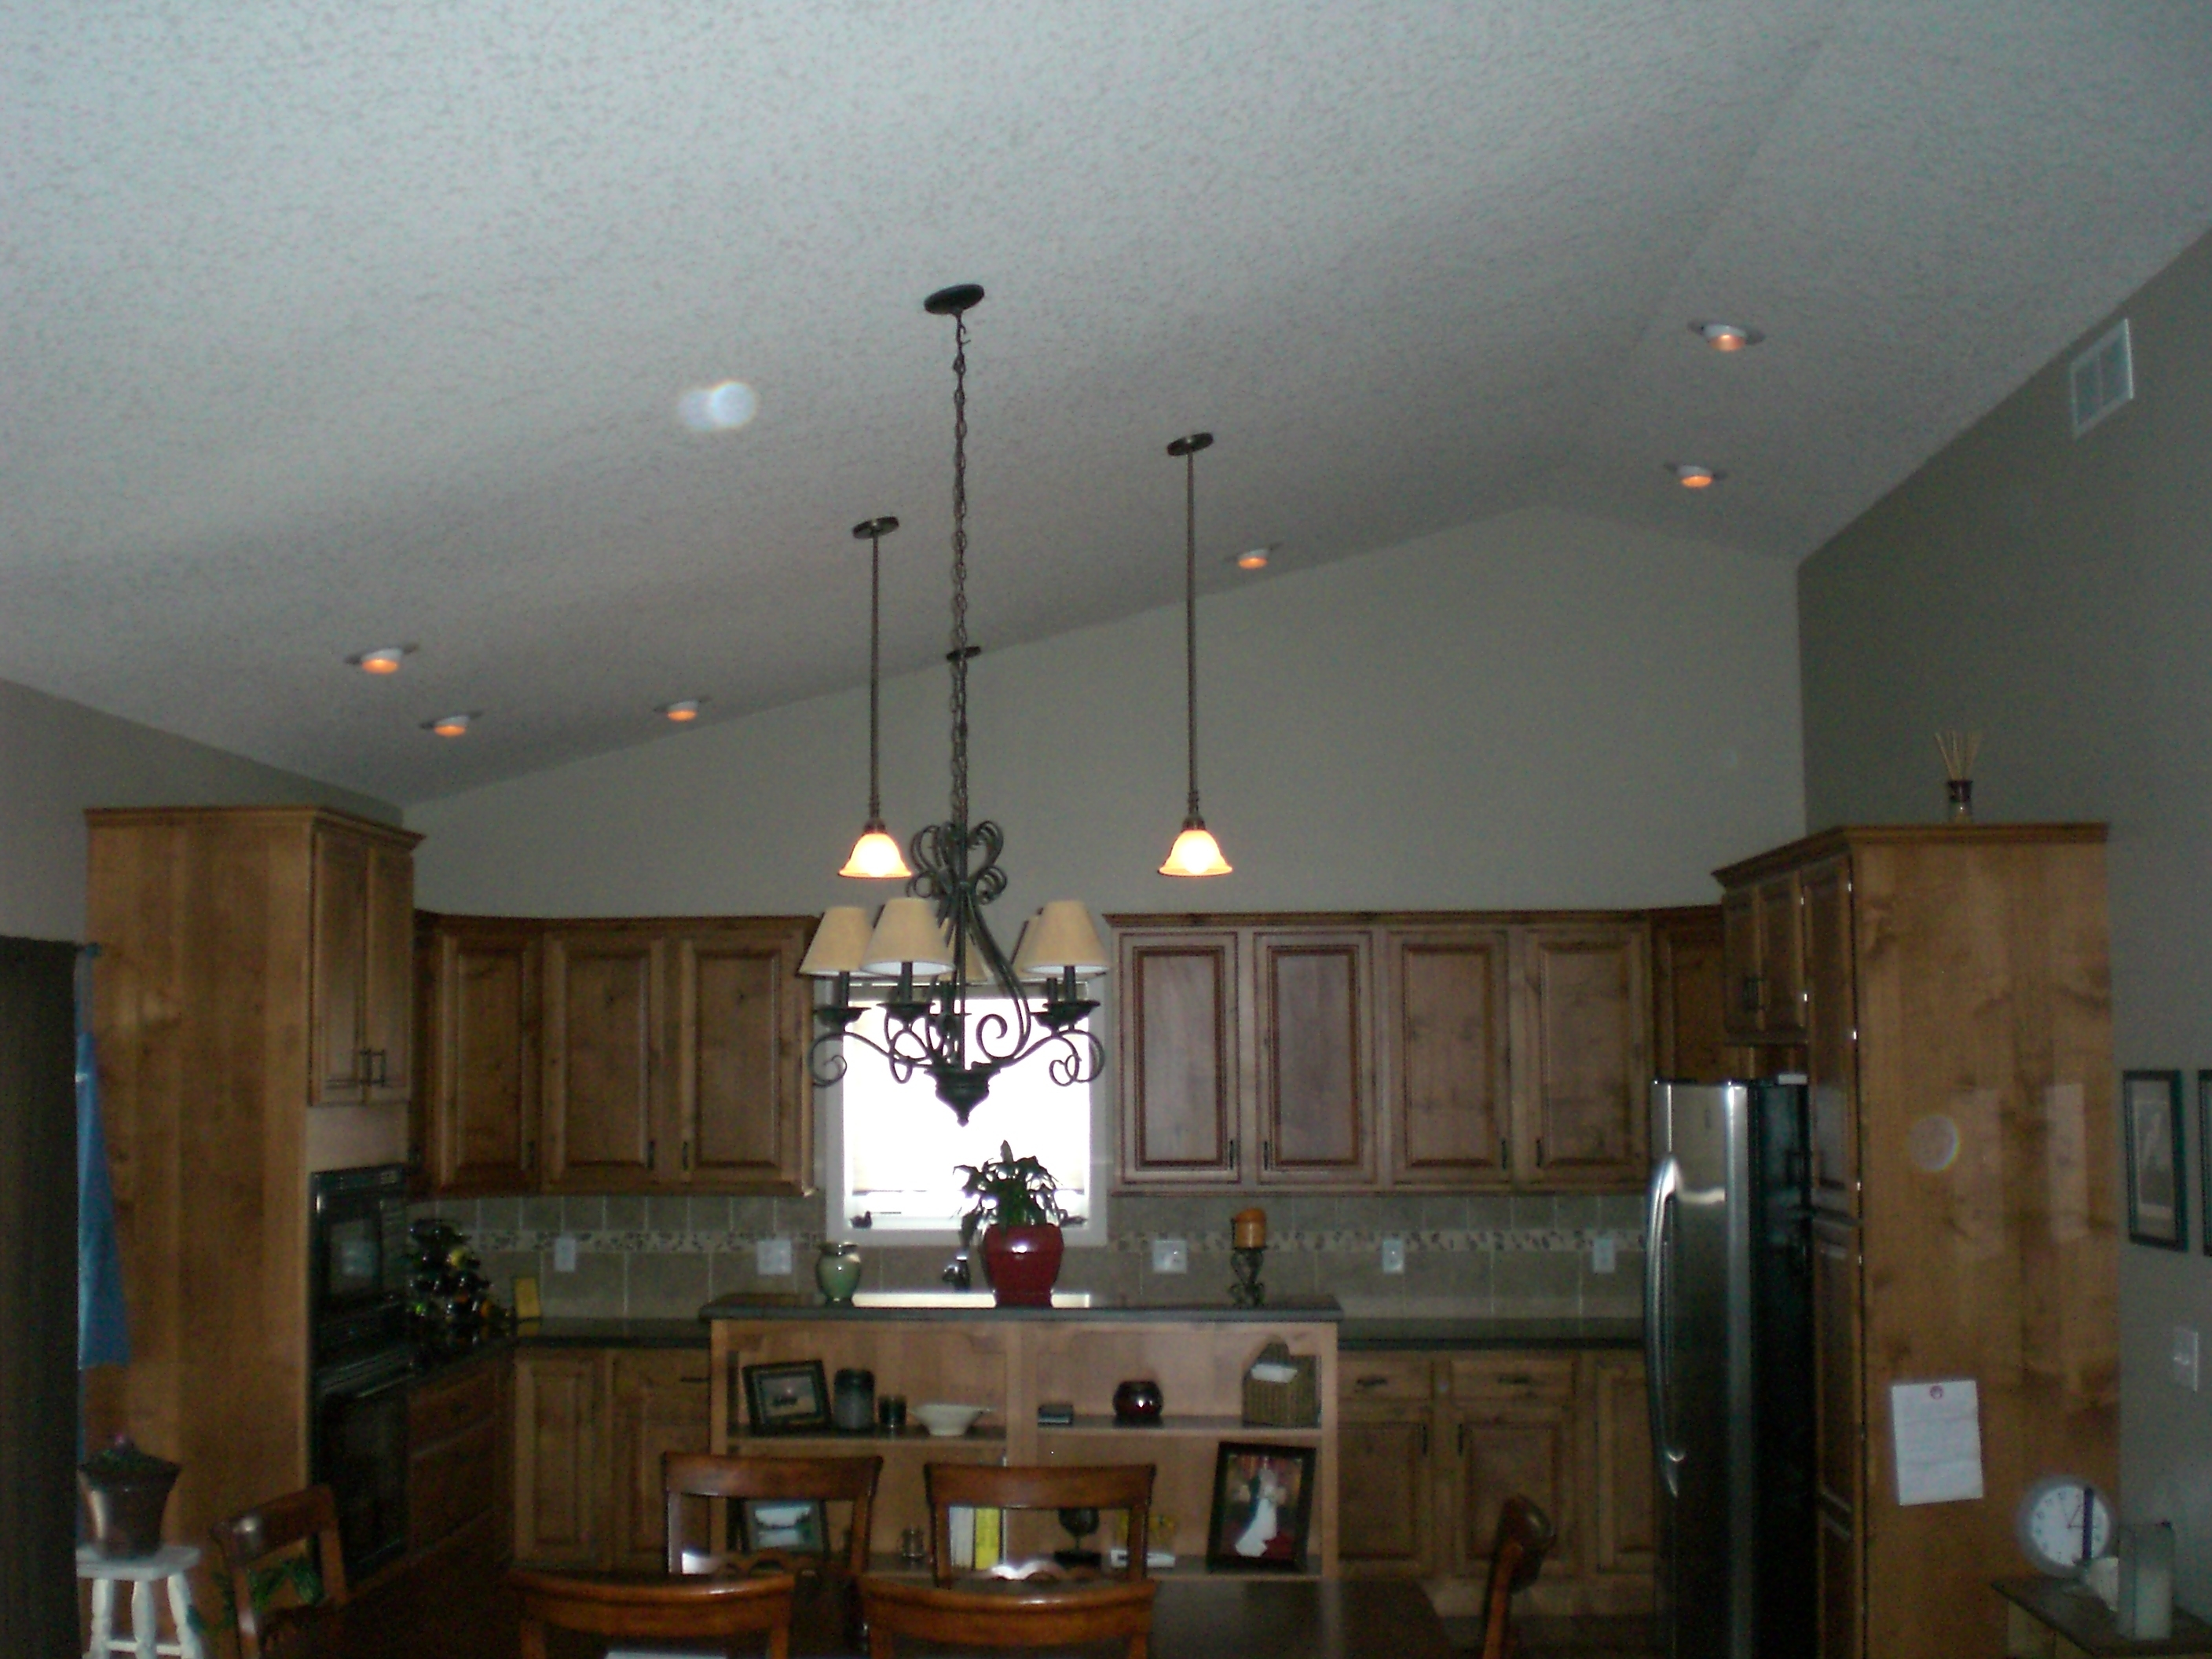 Led Recessed Lighting For Vaulted Ceilings